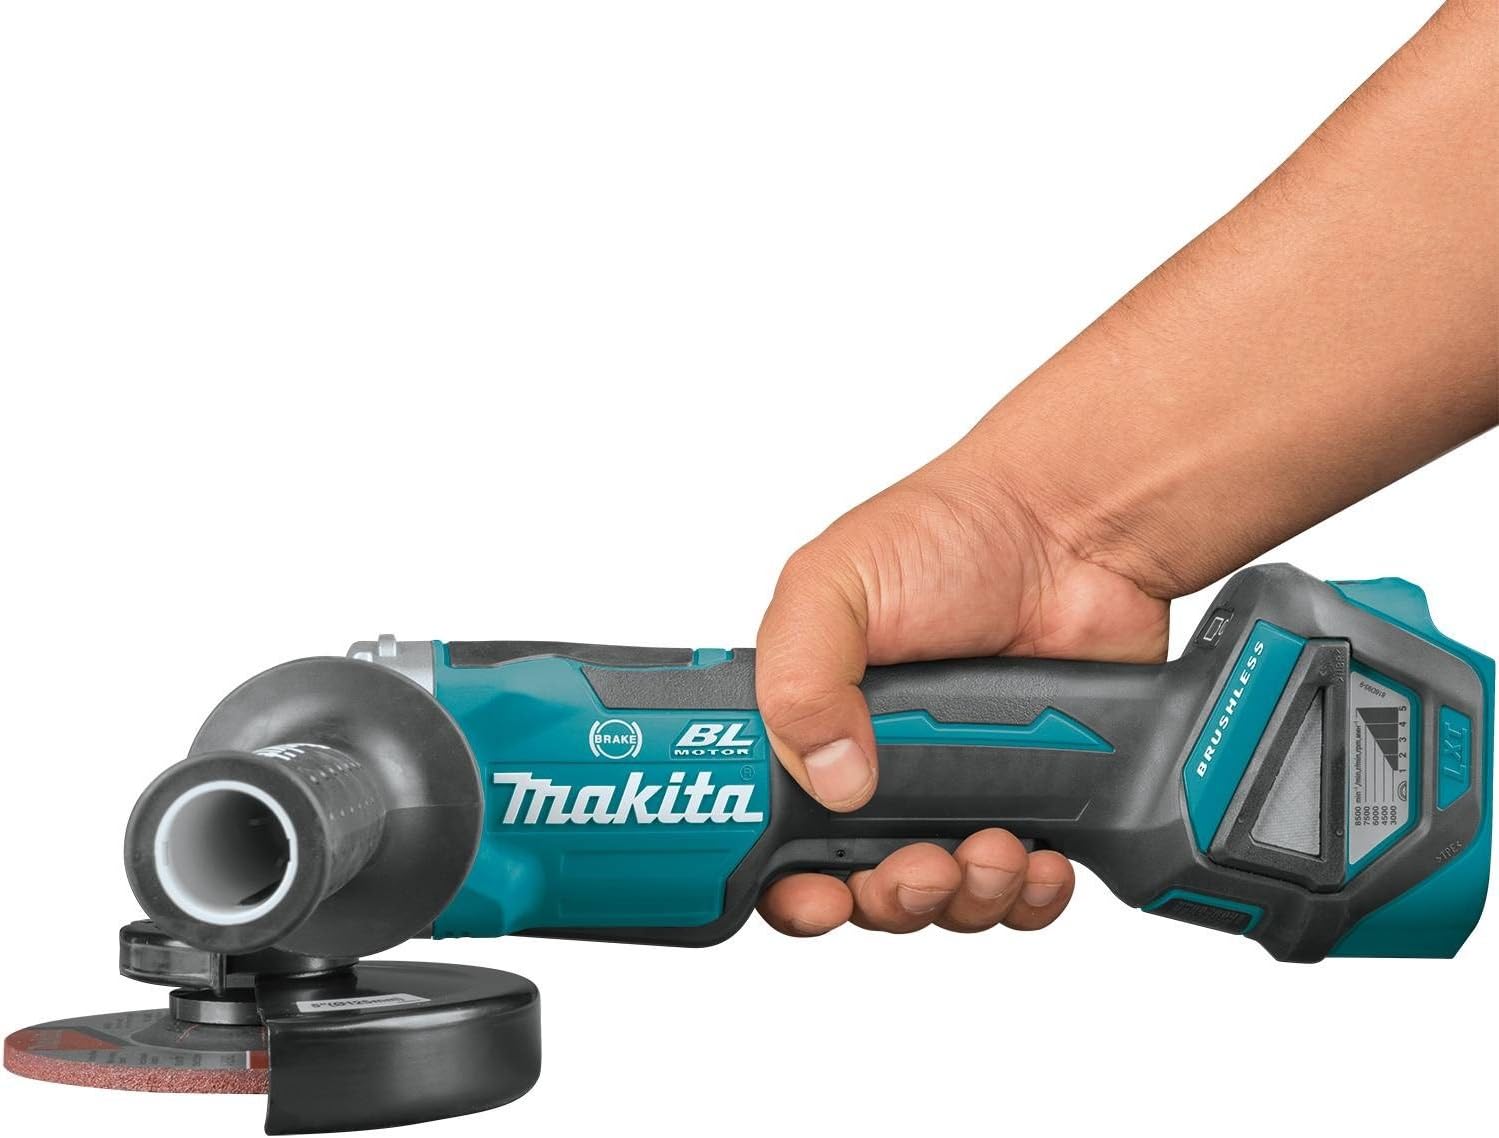 Makita XAG20Z 18V LXT Lithium-Ion 4-1/2 / 5 Paddle Switch Cut-Off/Angle Grinder, XRJ07ZB 18V LXT Lithium-Ion Sub-Compact Brushless Cordless Recipro Saw,  BL1840B 18V LXT Lithium-Ion 4.0Ah Battery